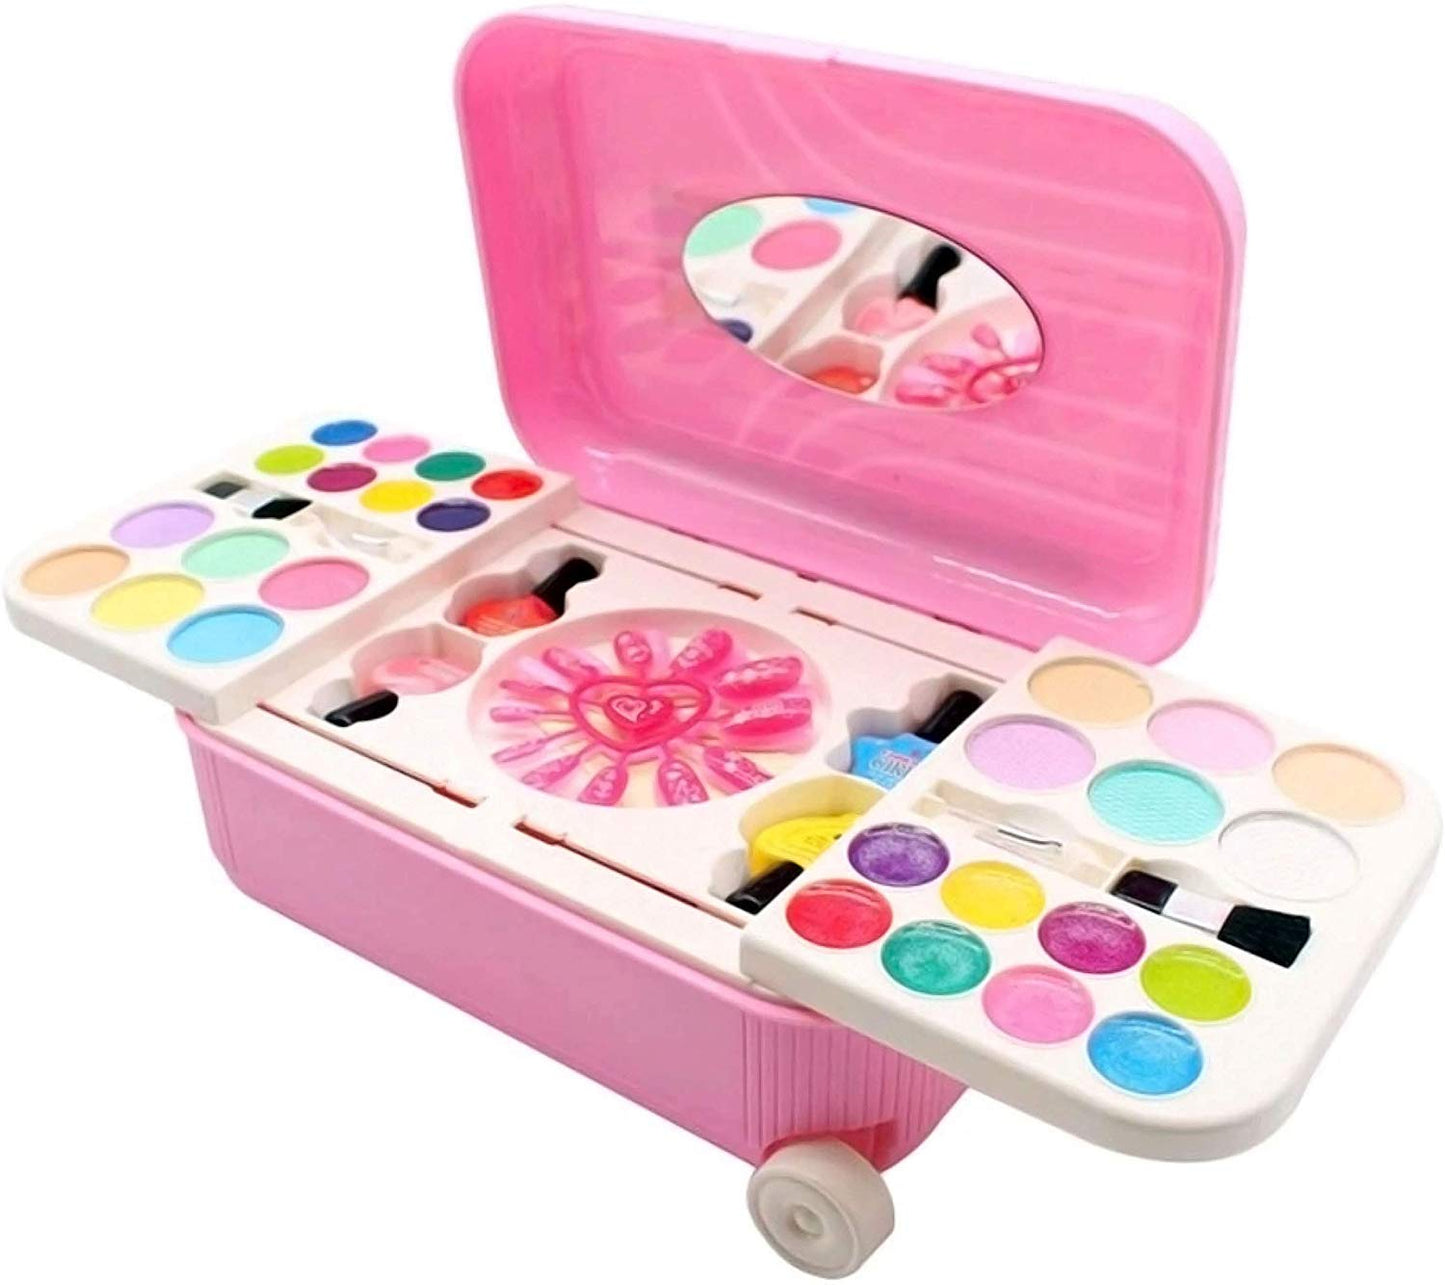 MM Toys Beauty Beauty Cart Nail Art Set for Girls, All-in-One Trolley, Water-Removable Real Cosmetics, Multi-Color Play Game for Children